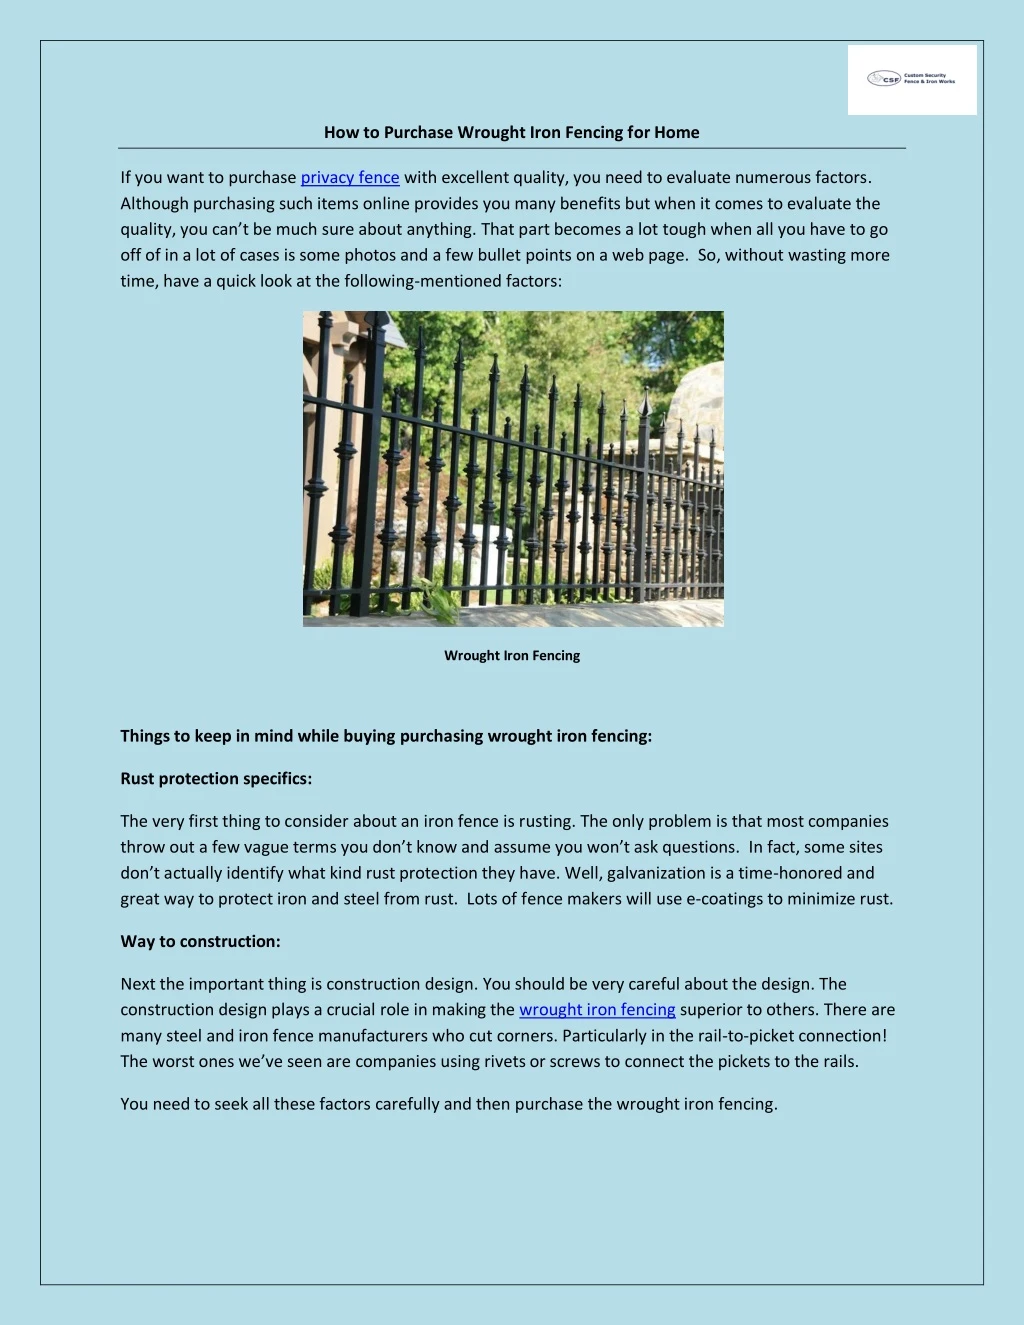 how to purchase wrought iron fencing for home